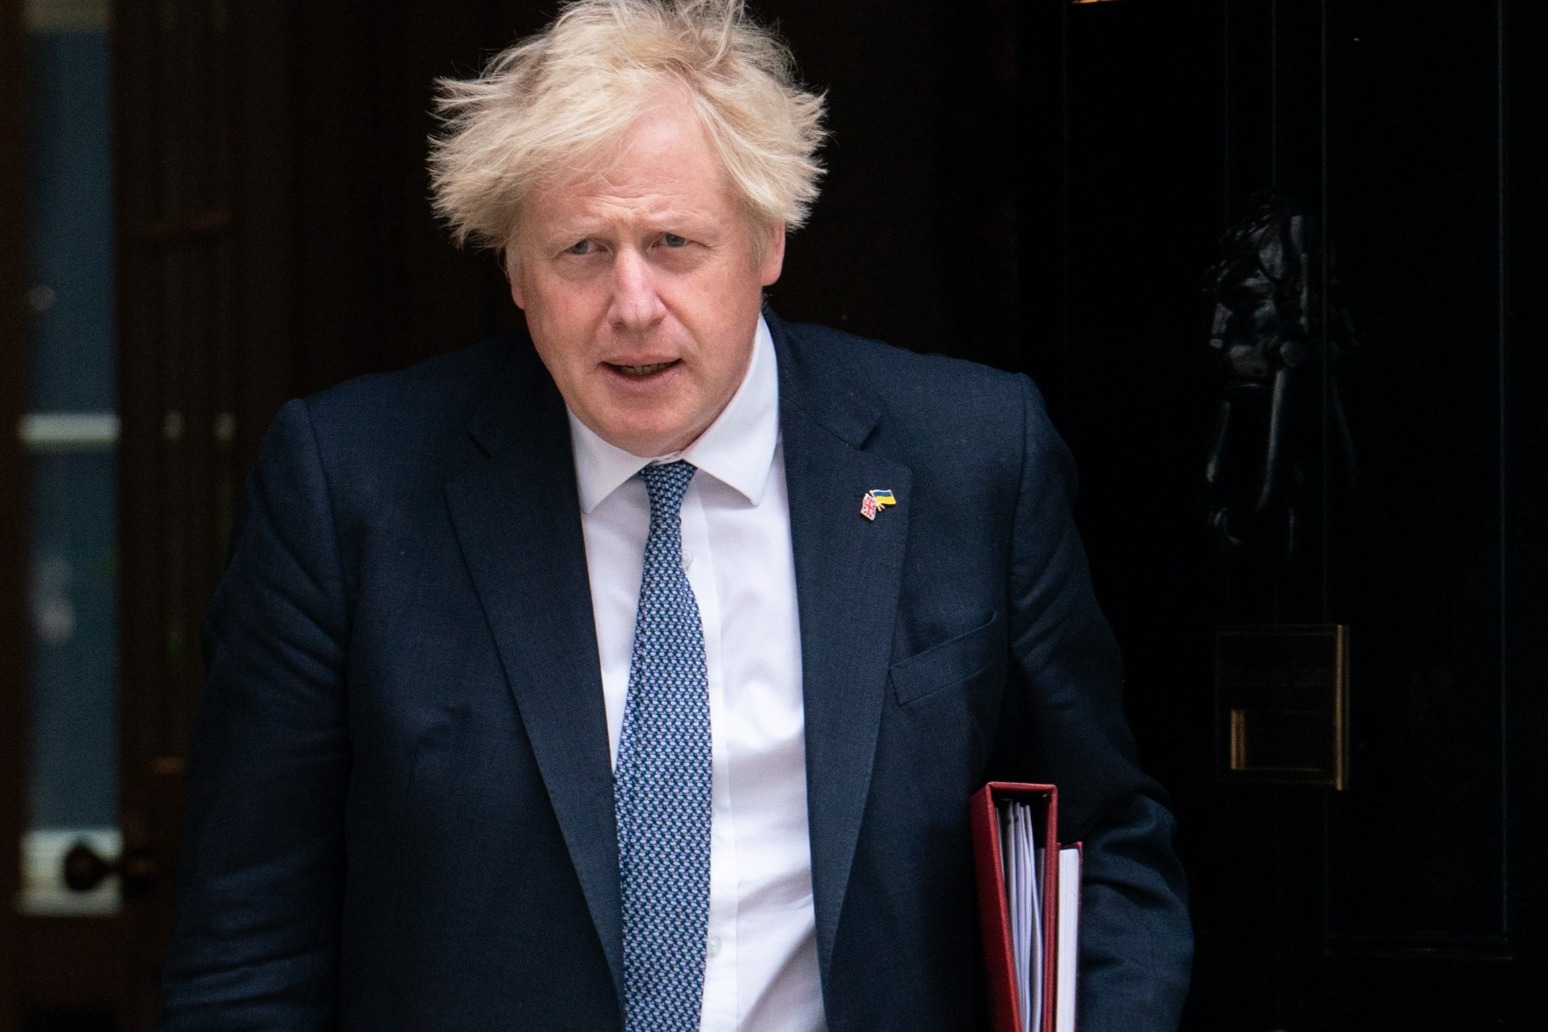 Pressure increases on Johnson following ‘damning’ partygate report 